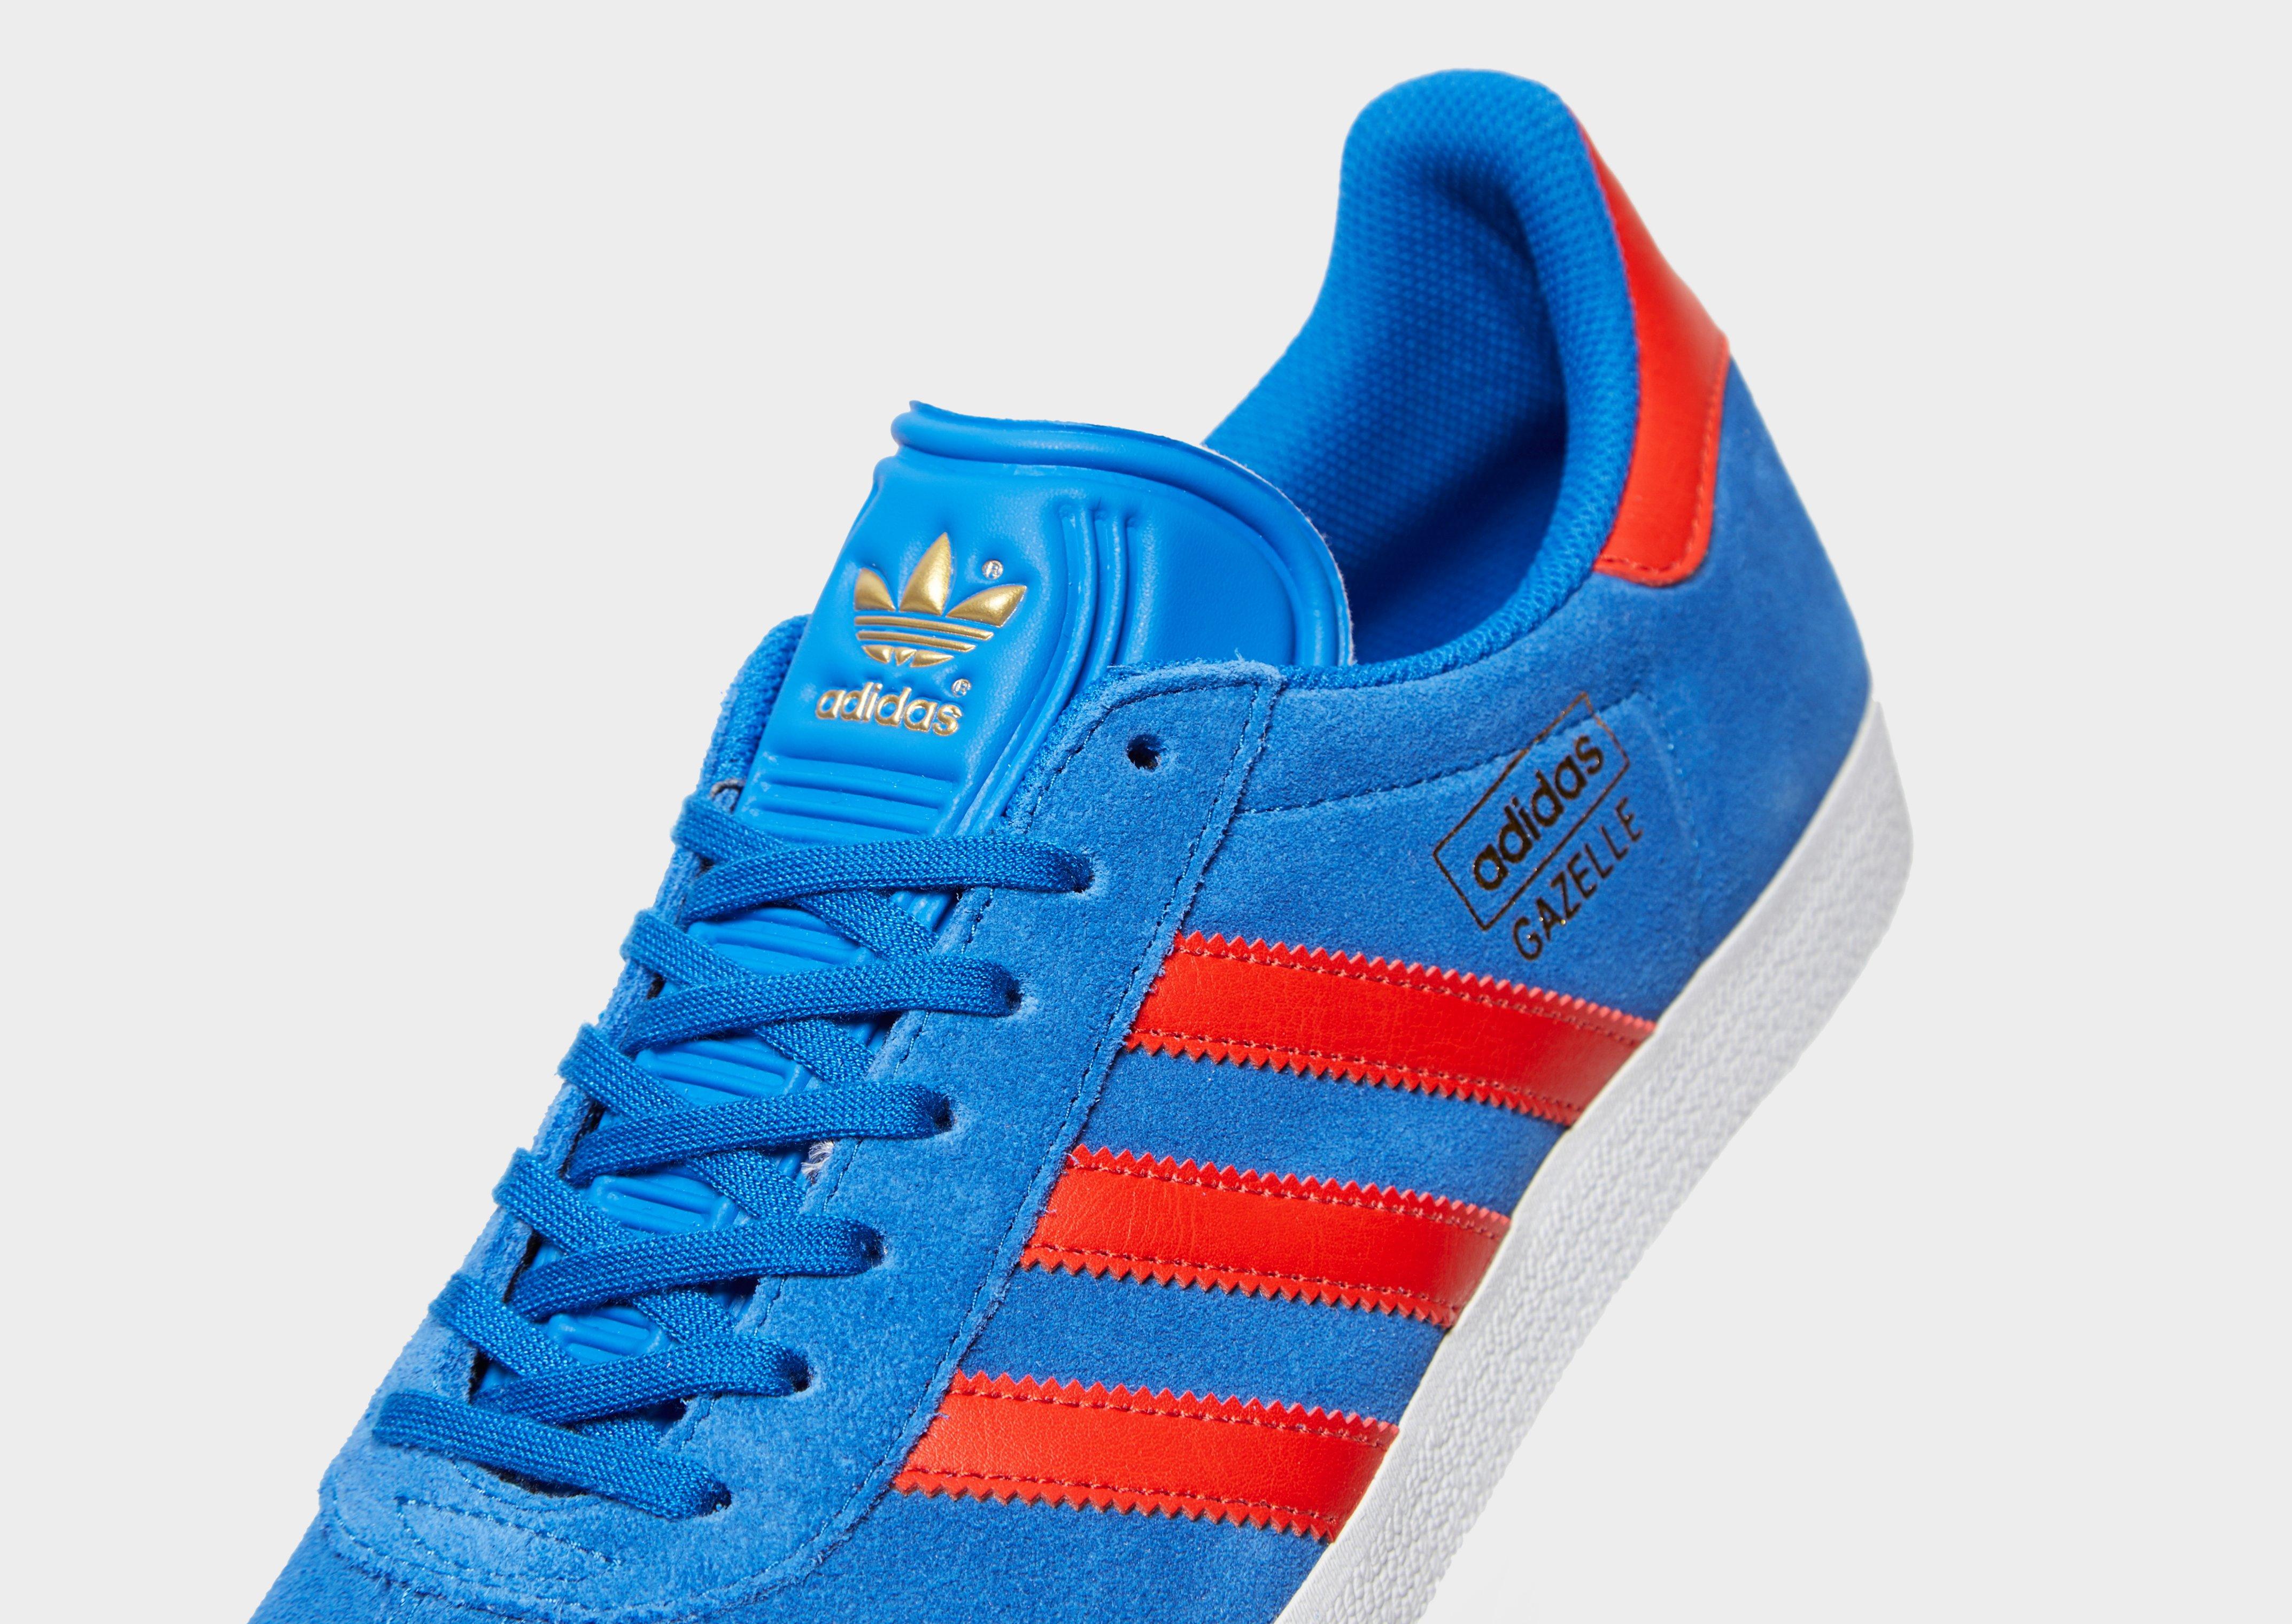 adidas gazelle red and blue